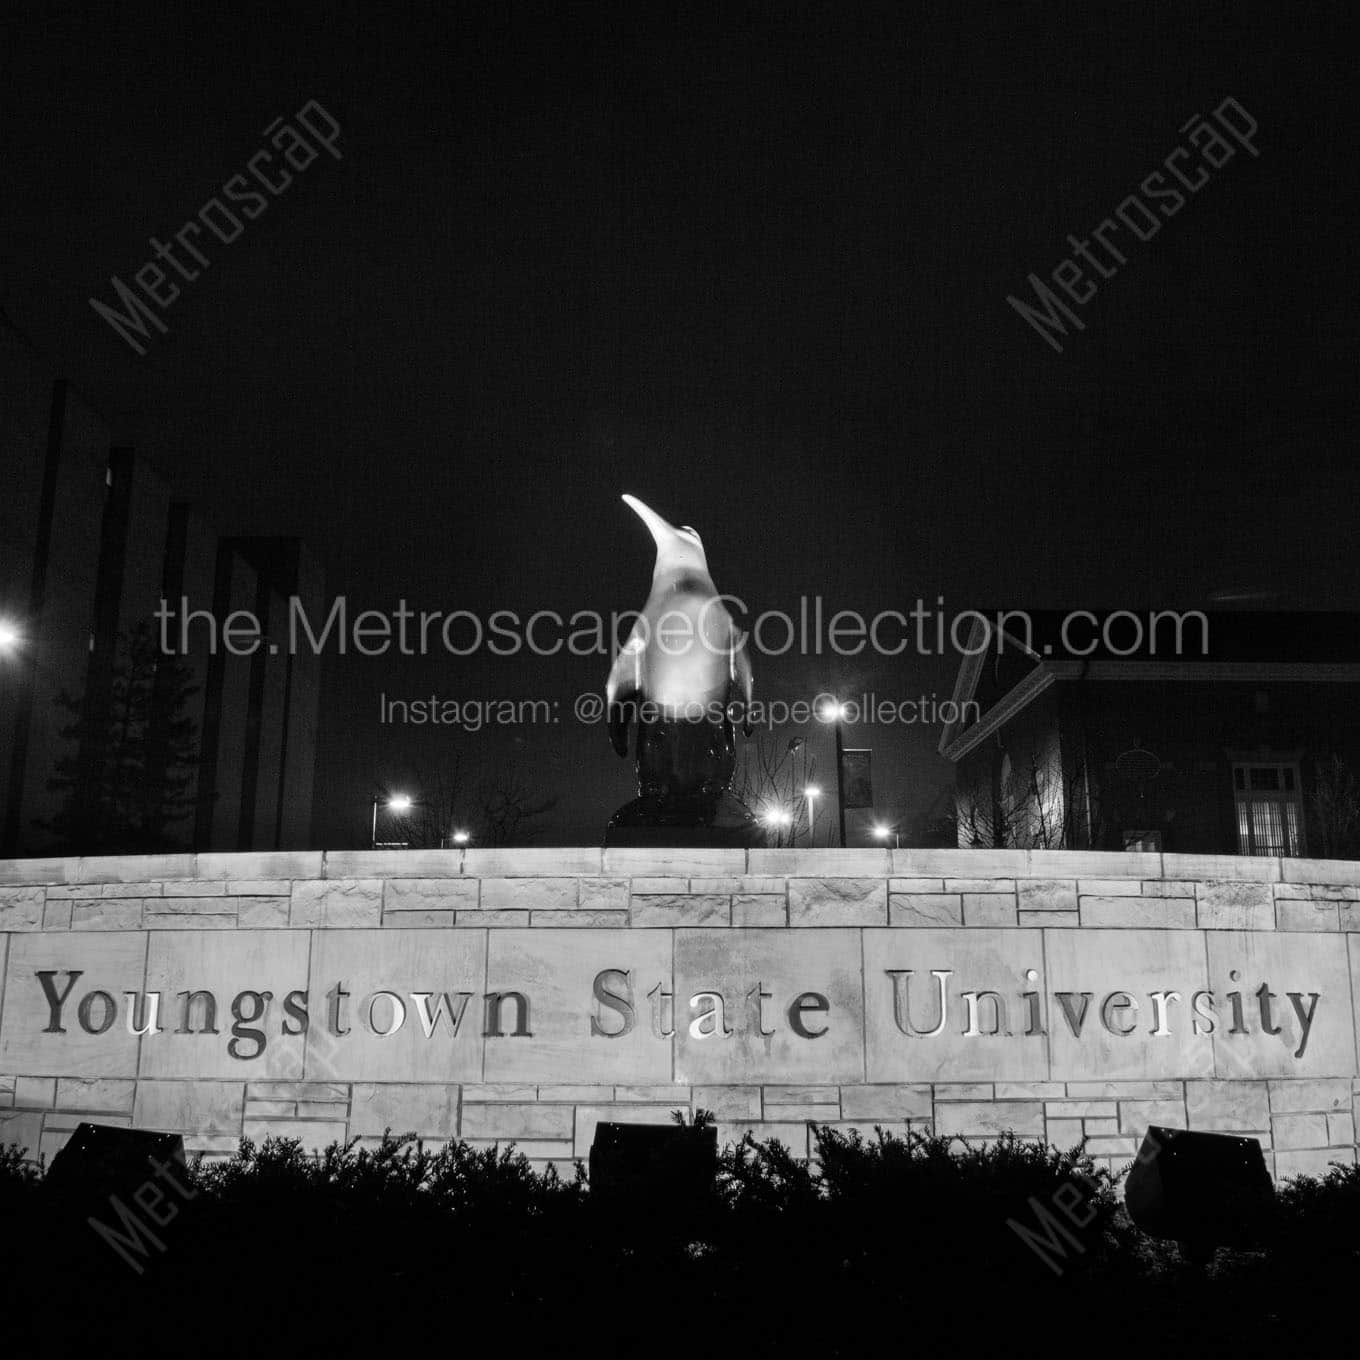 youngstown state university sign at night Black & White Wall Art